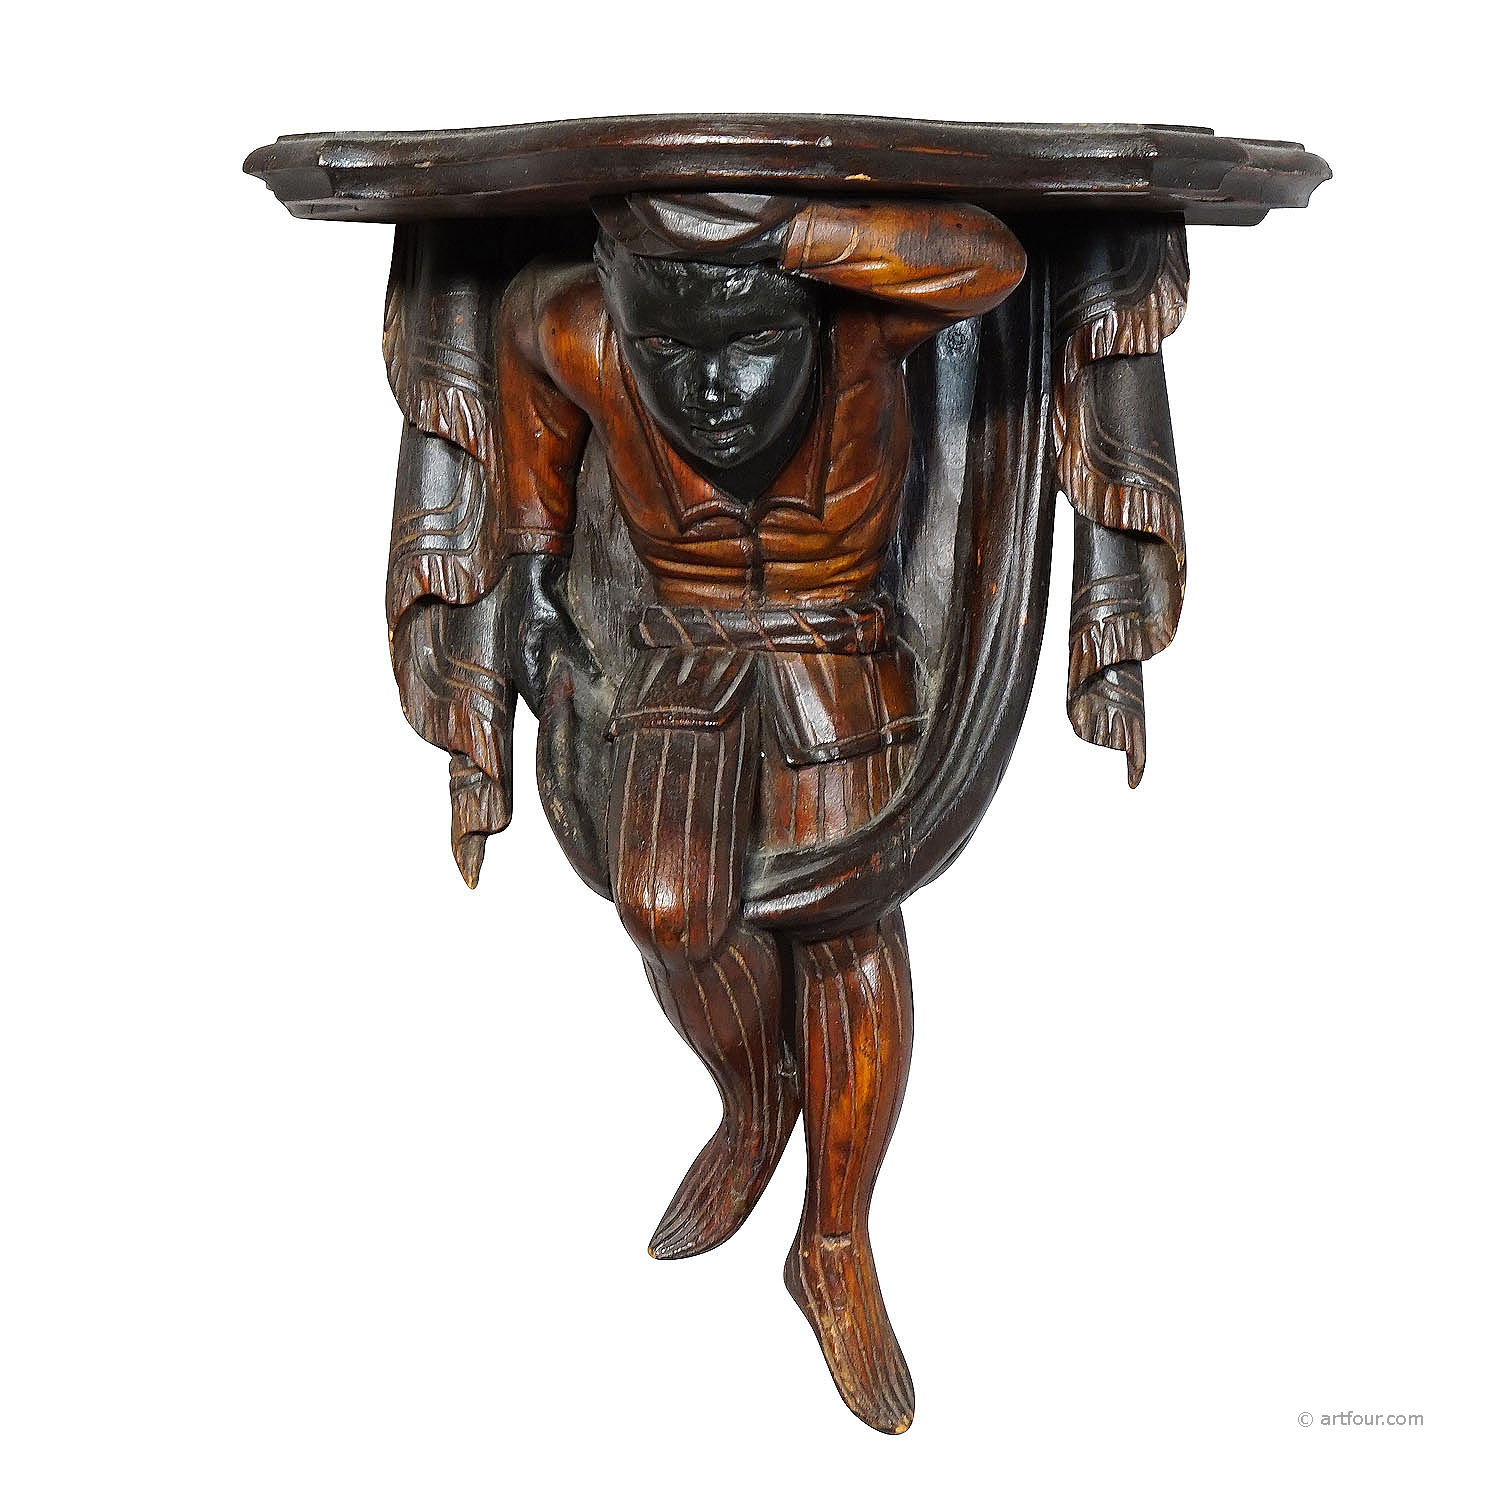 19th century Carved and Polychromed Venetian Shelve with Jester Figure 